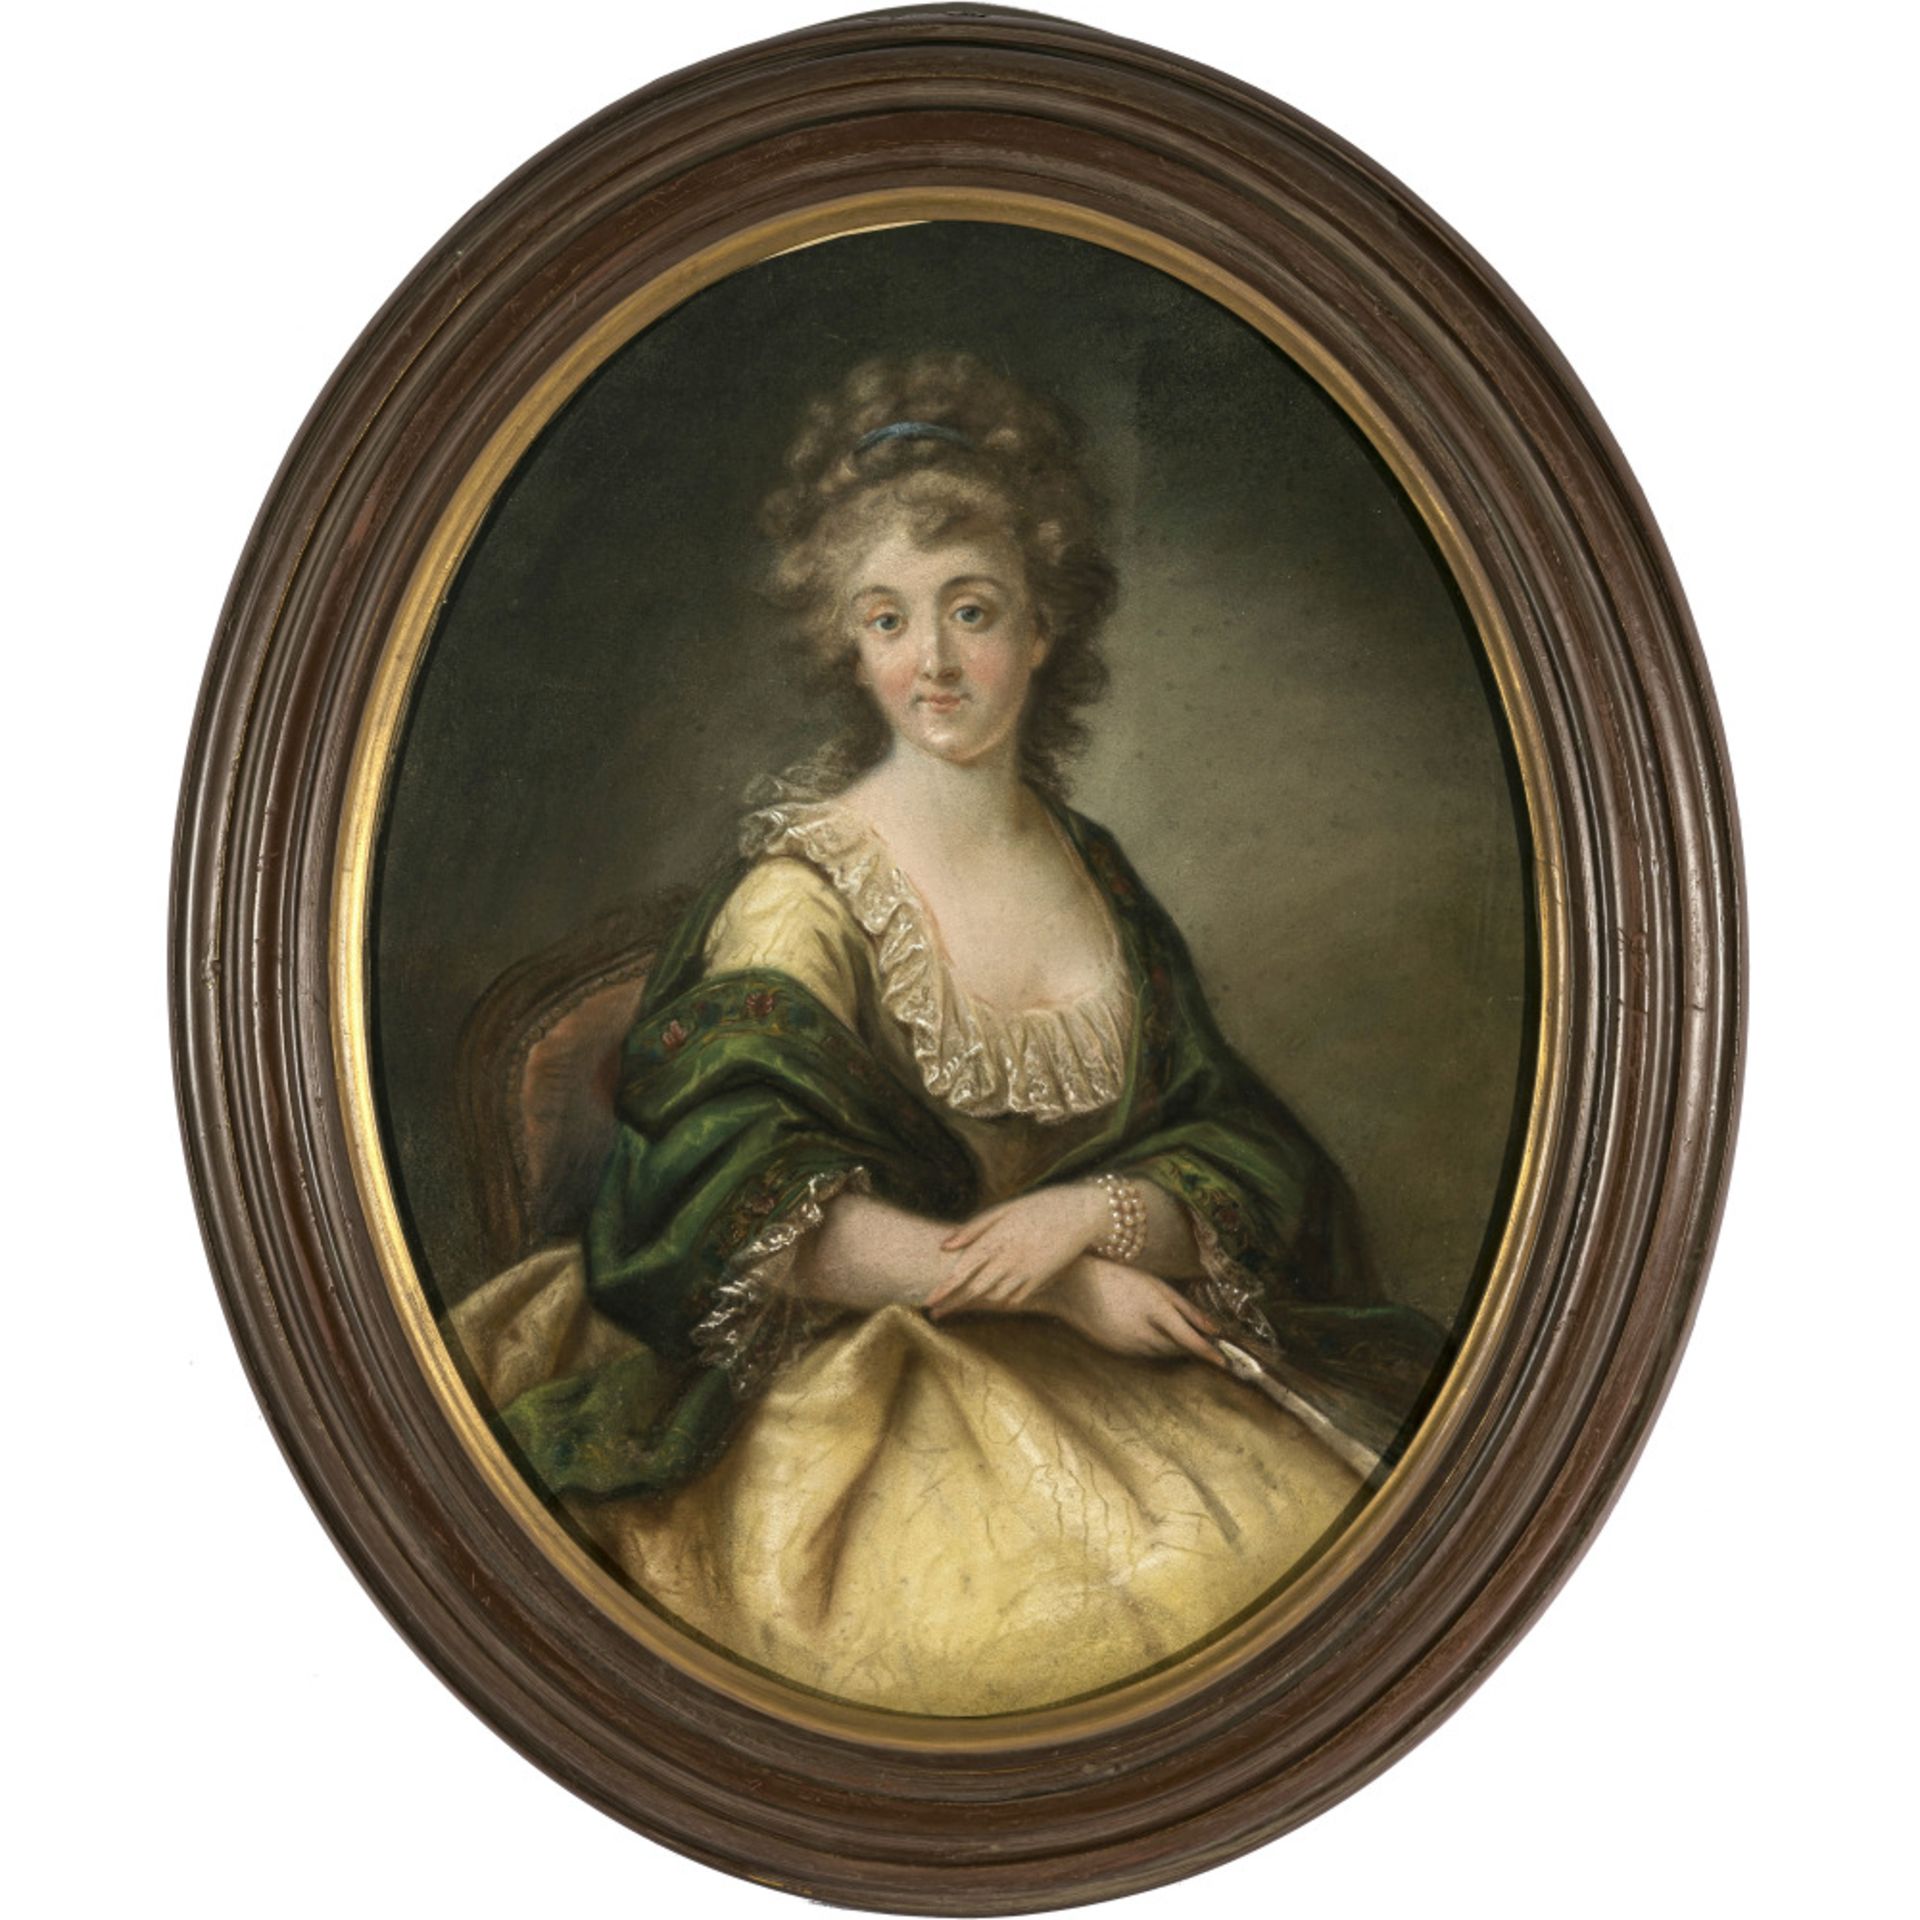 Unbekannt 2nd half of the 18th century - Portrait of a seated lady with a fan